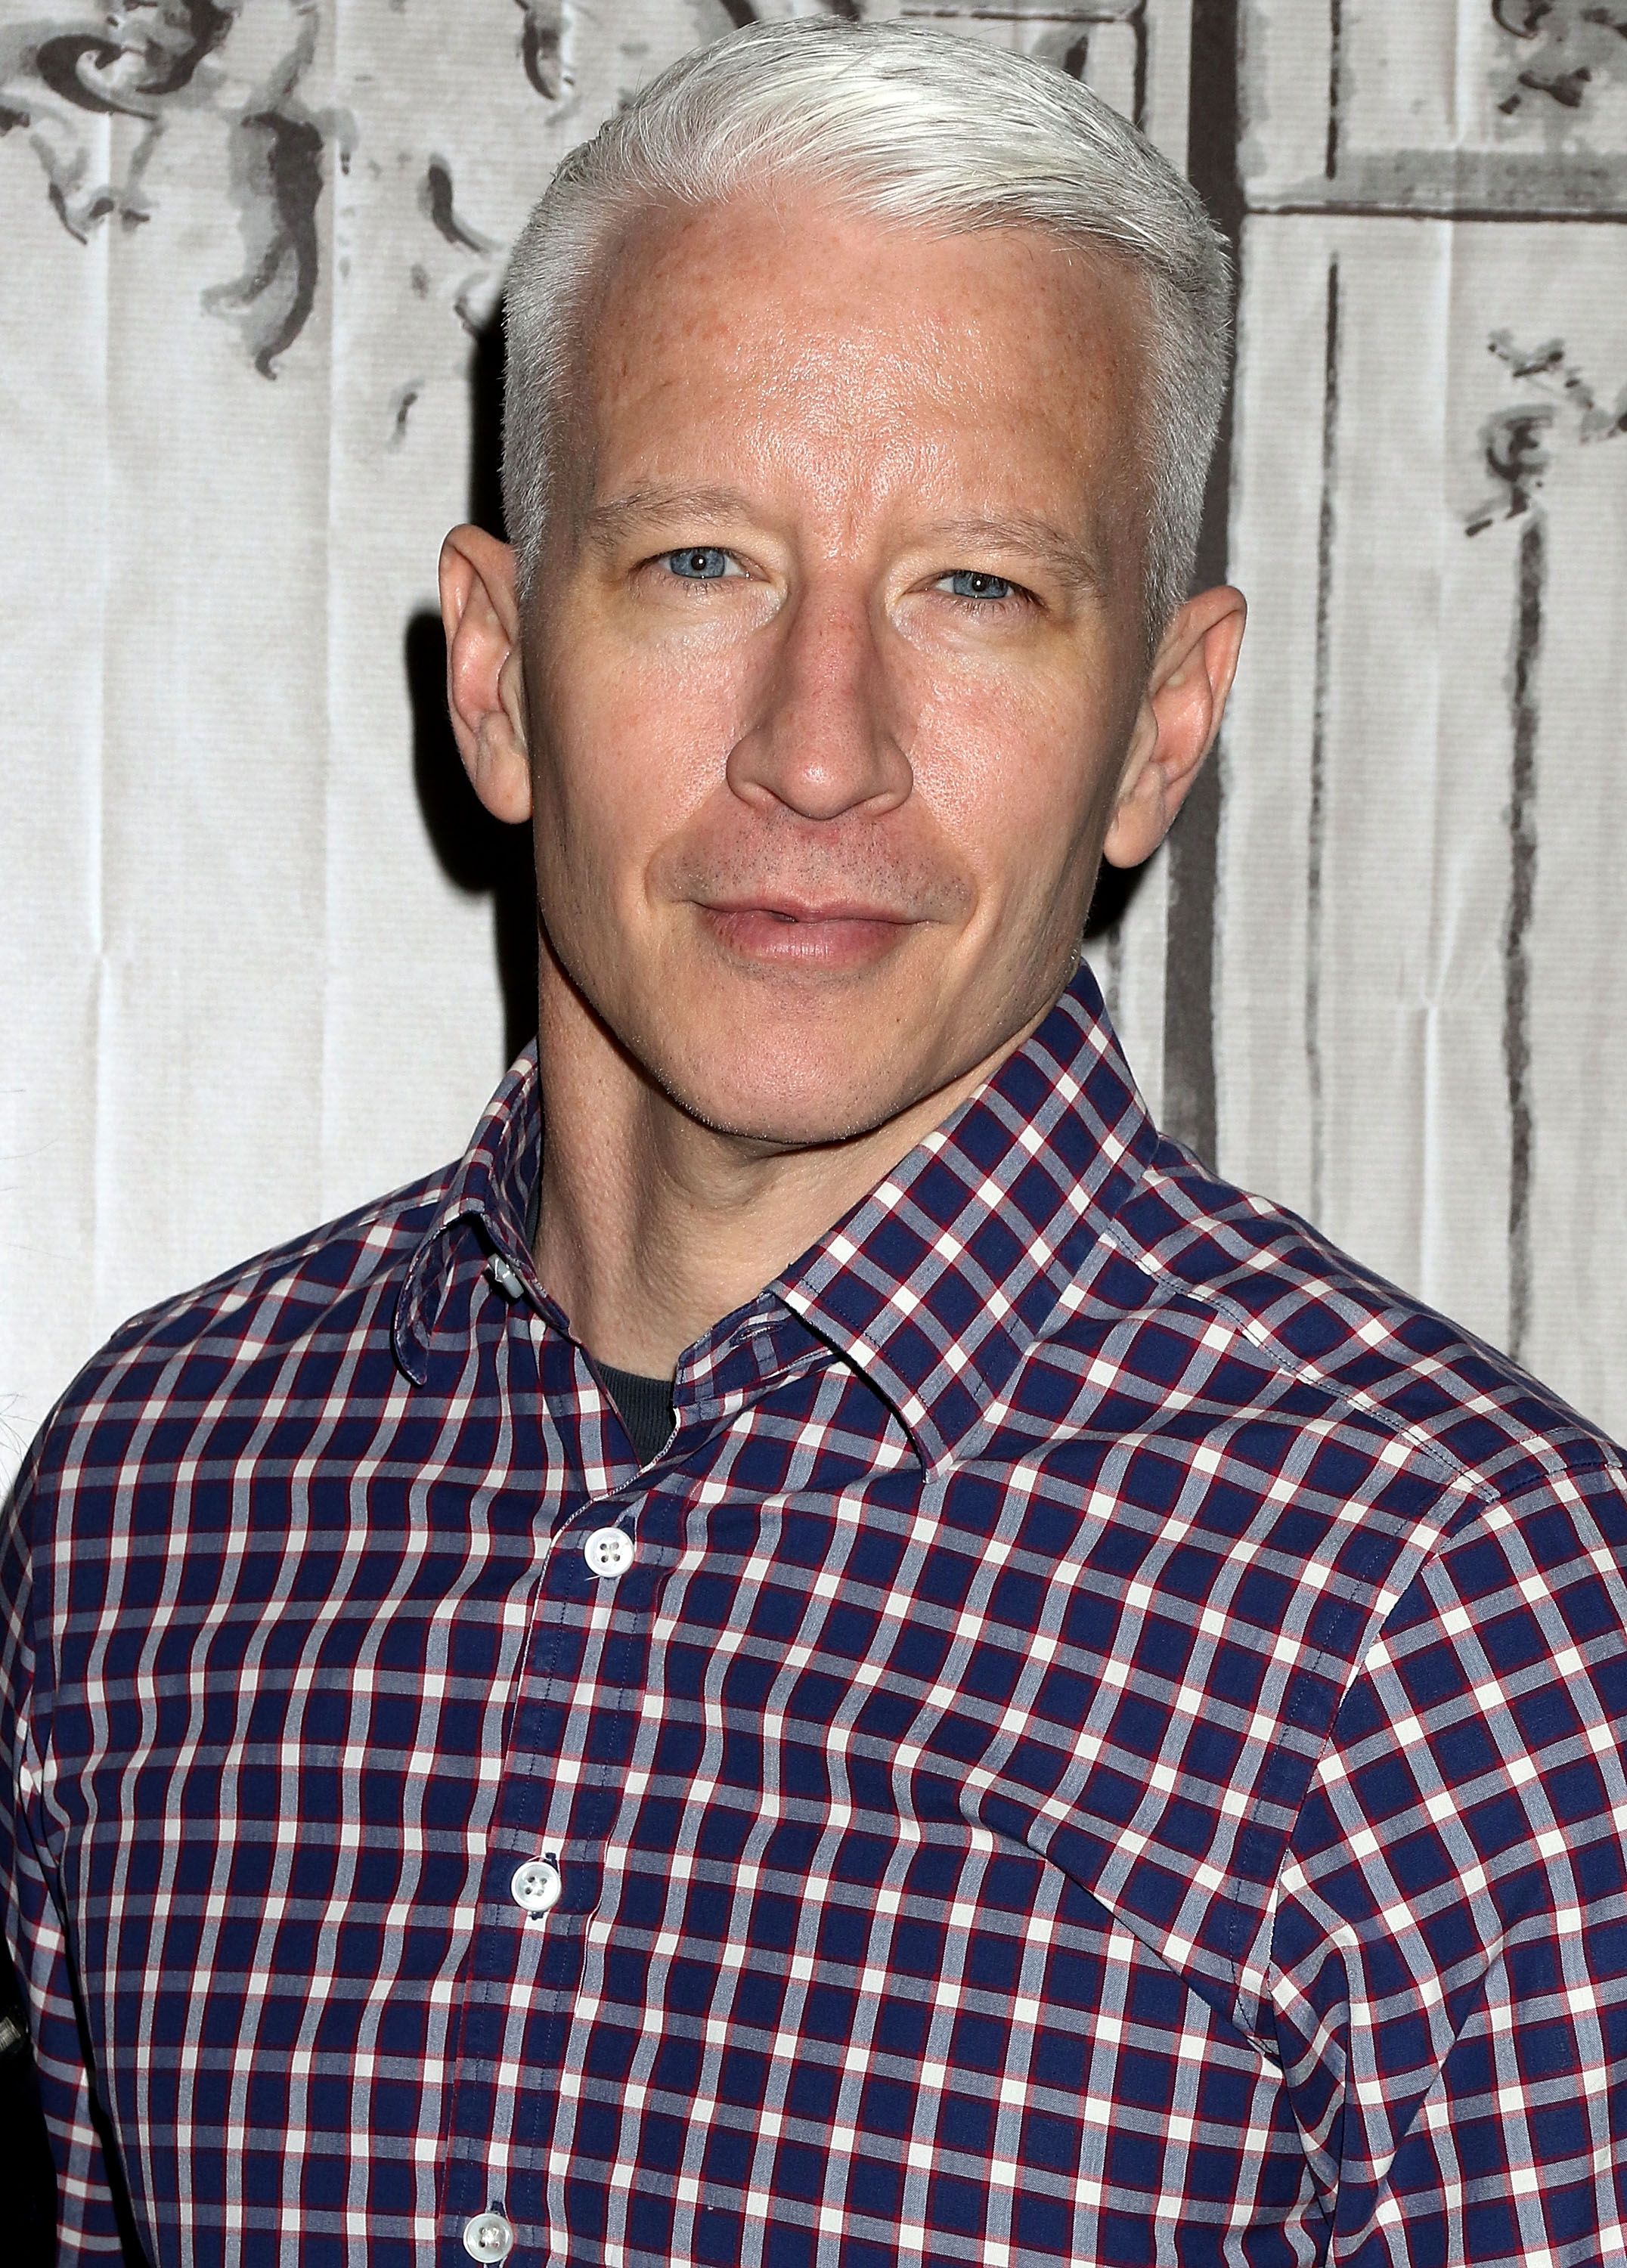 Anderson Cooper at AOL Build Speaker Series to discuss "Nothing Left Unsaid" at AOL Studios in New York on April 15, 2016 | Photo: Laura Cavanaugh/Getty Images